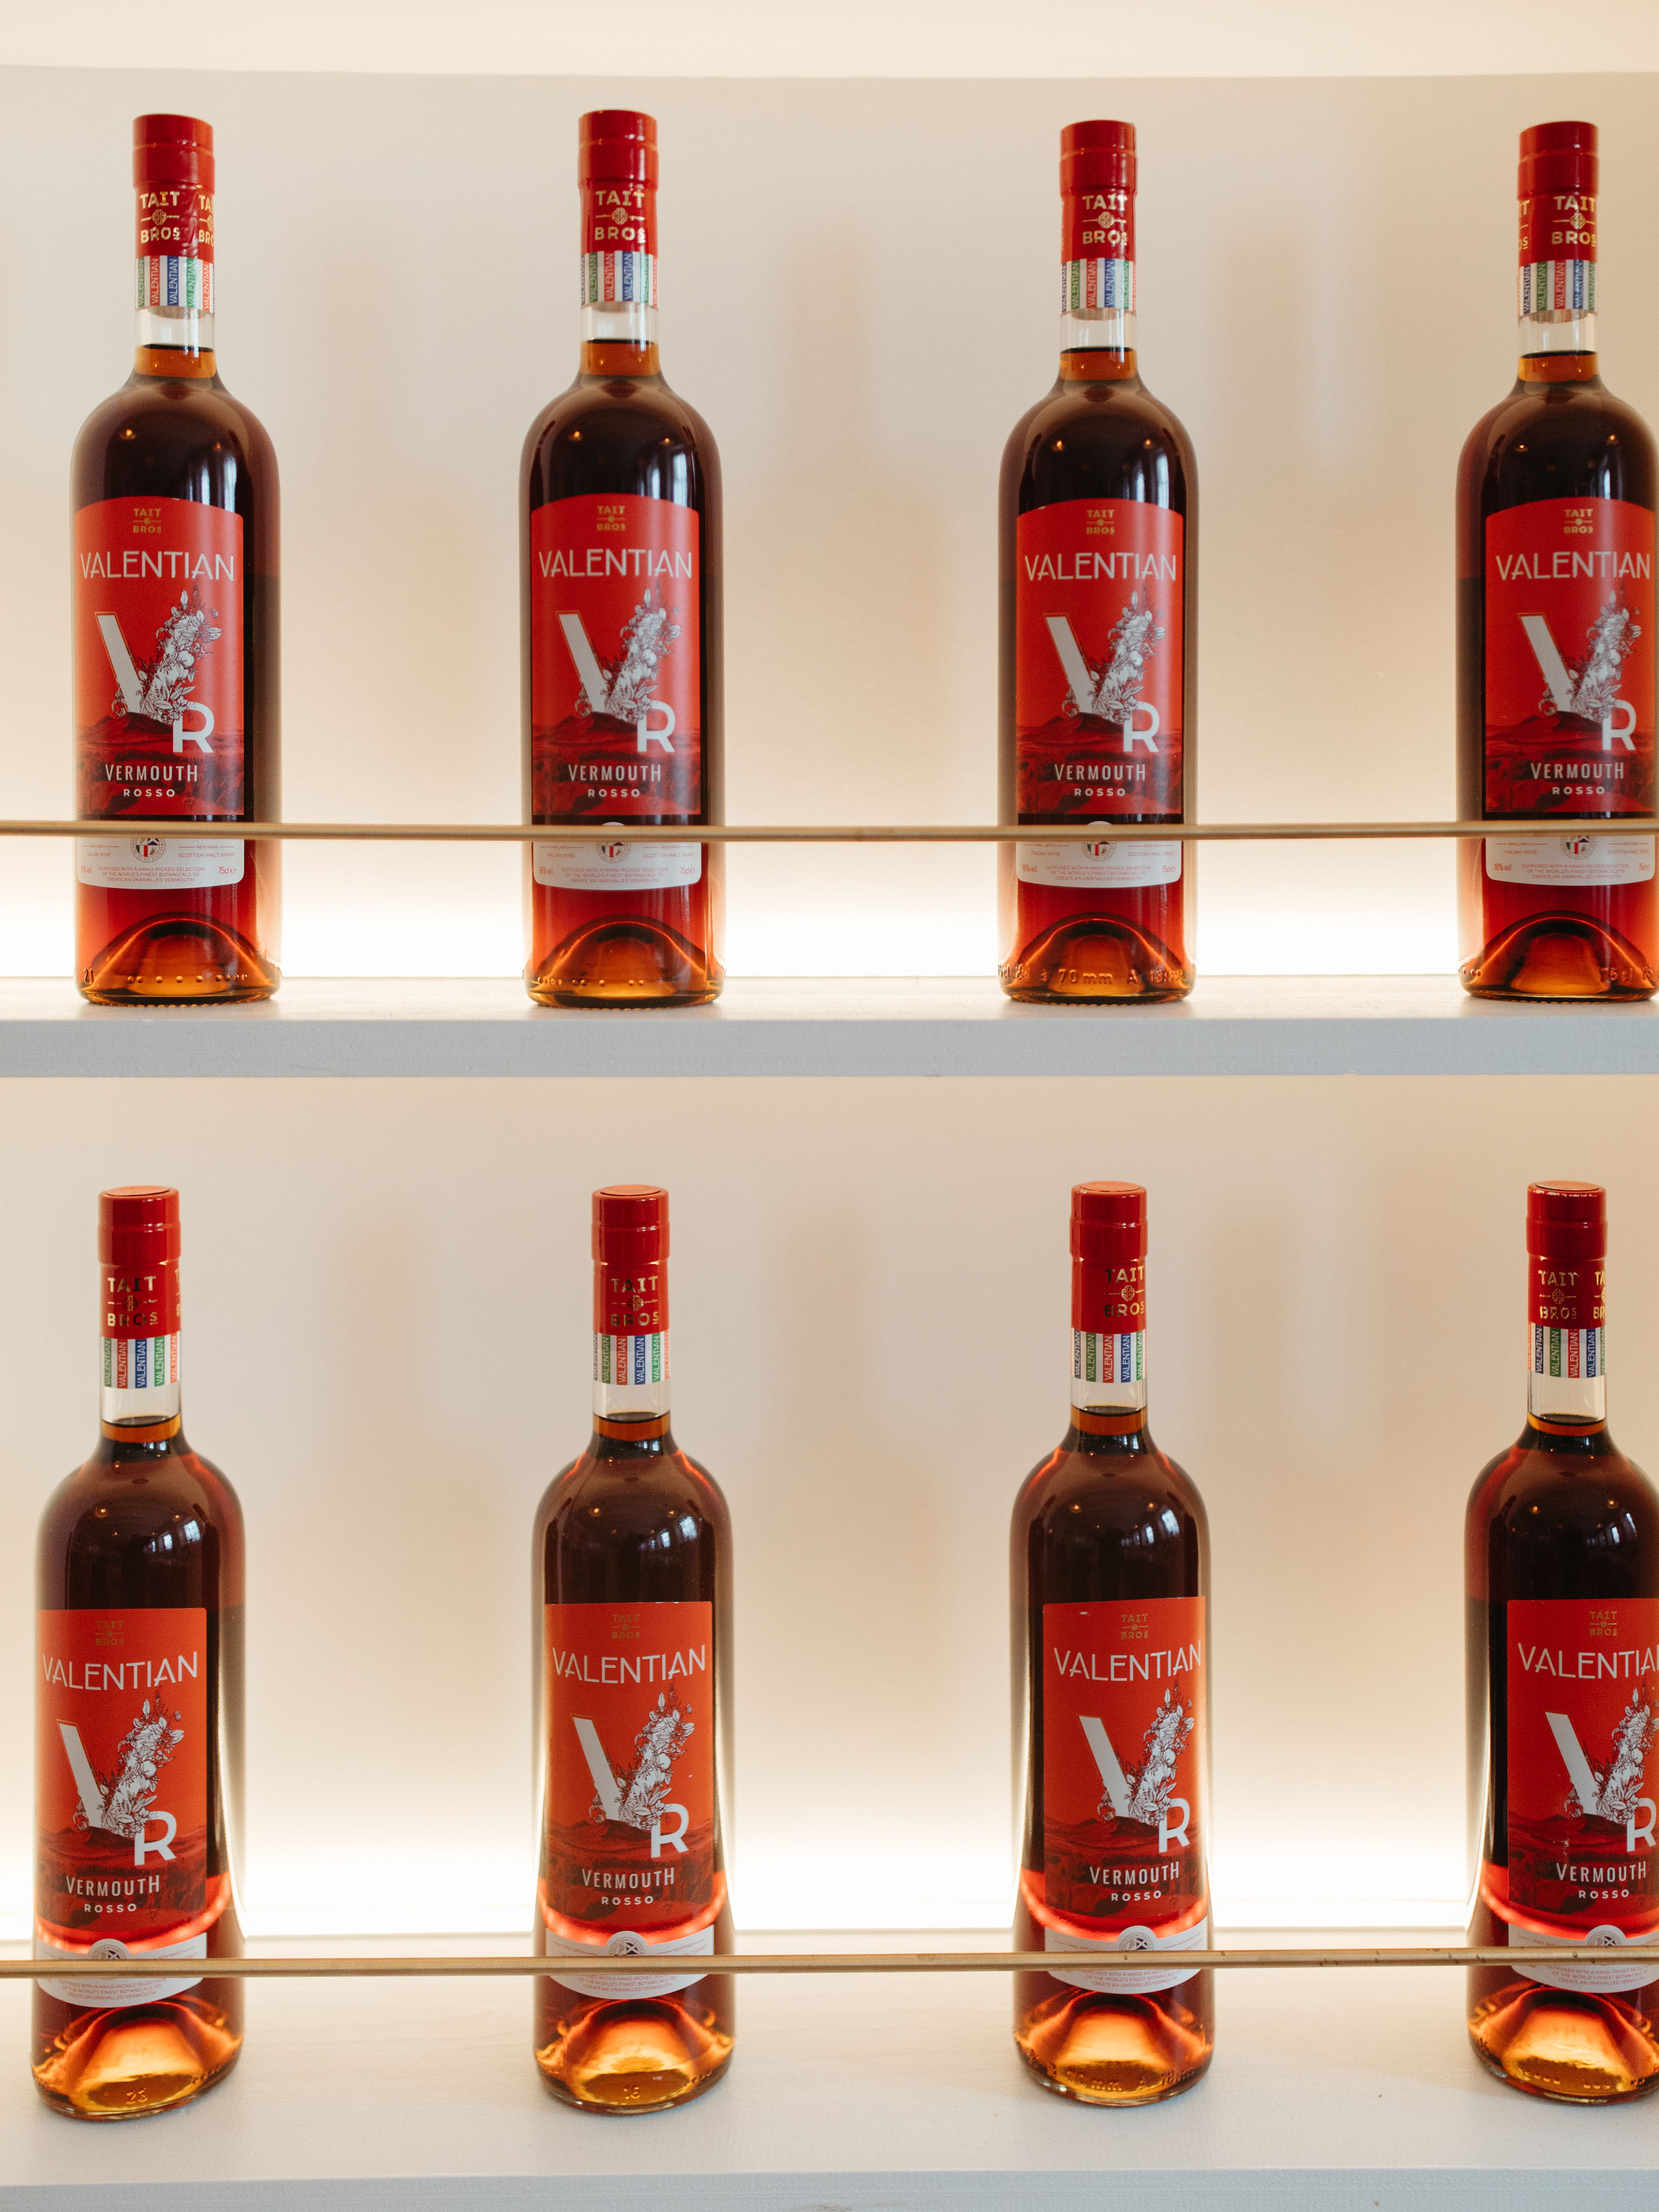 Valentian Vermouth launches £100,000 crowdfunding campaign